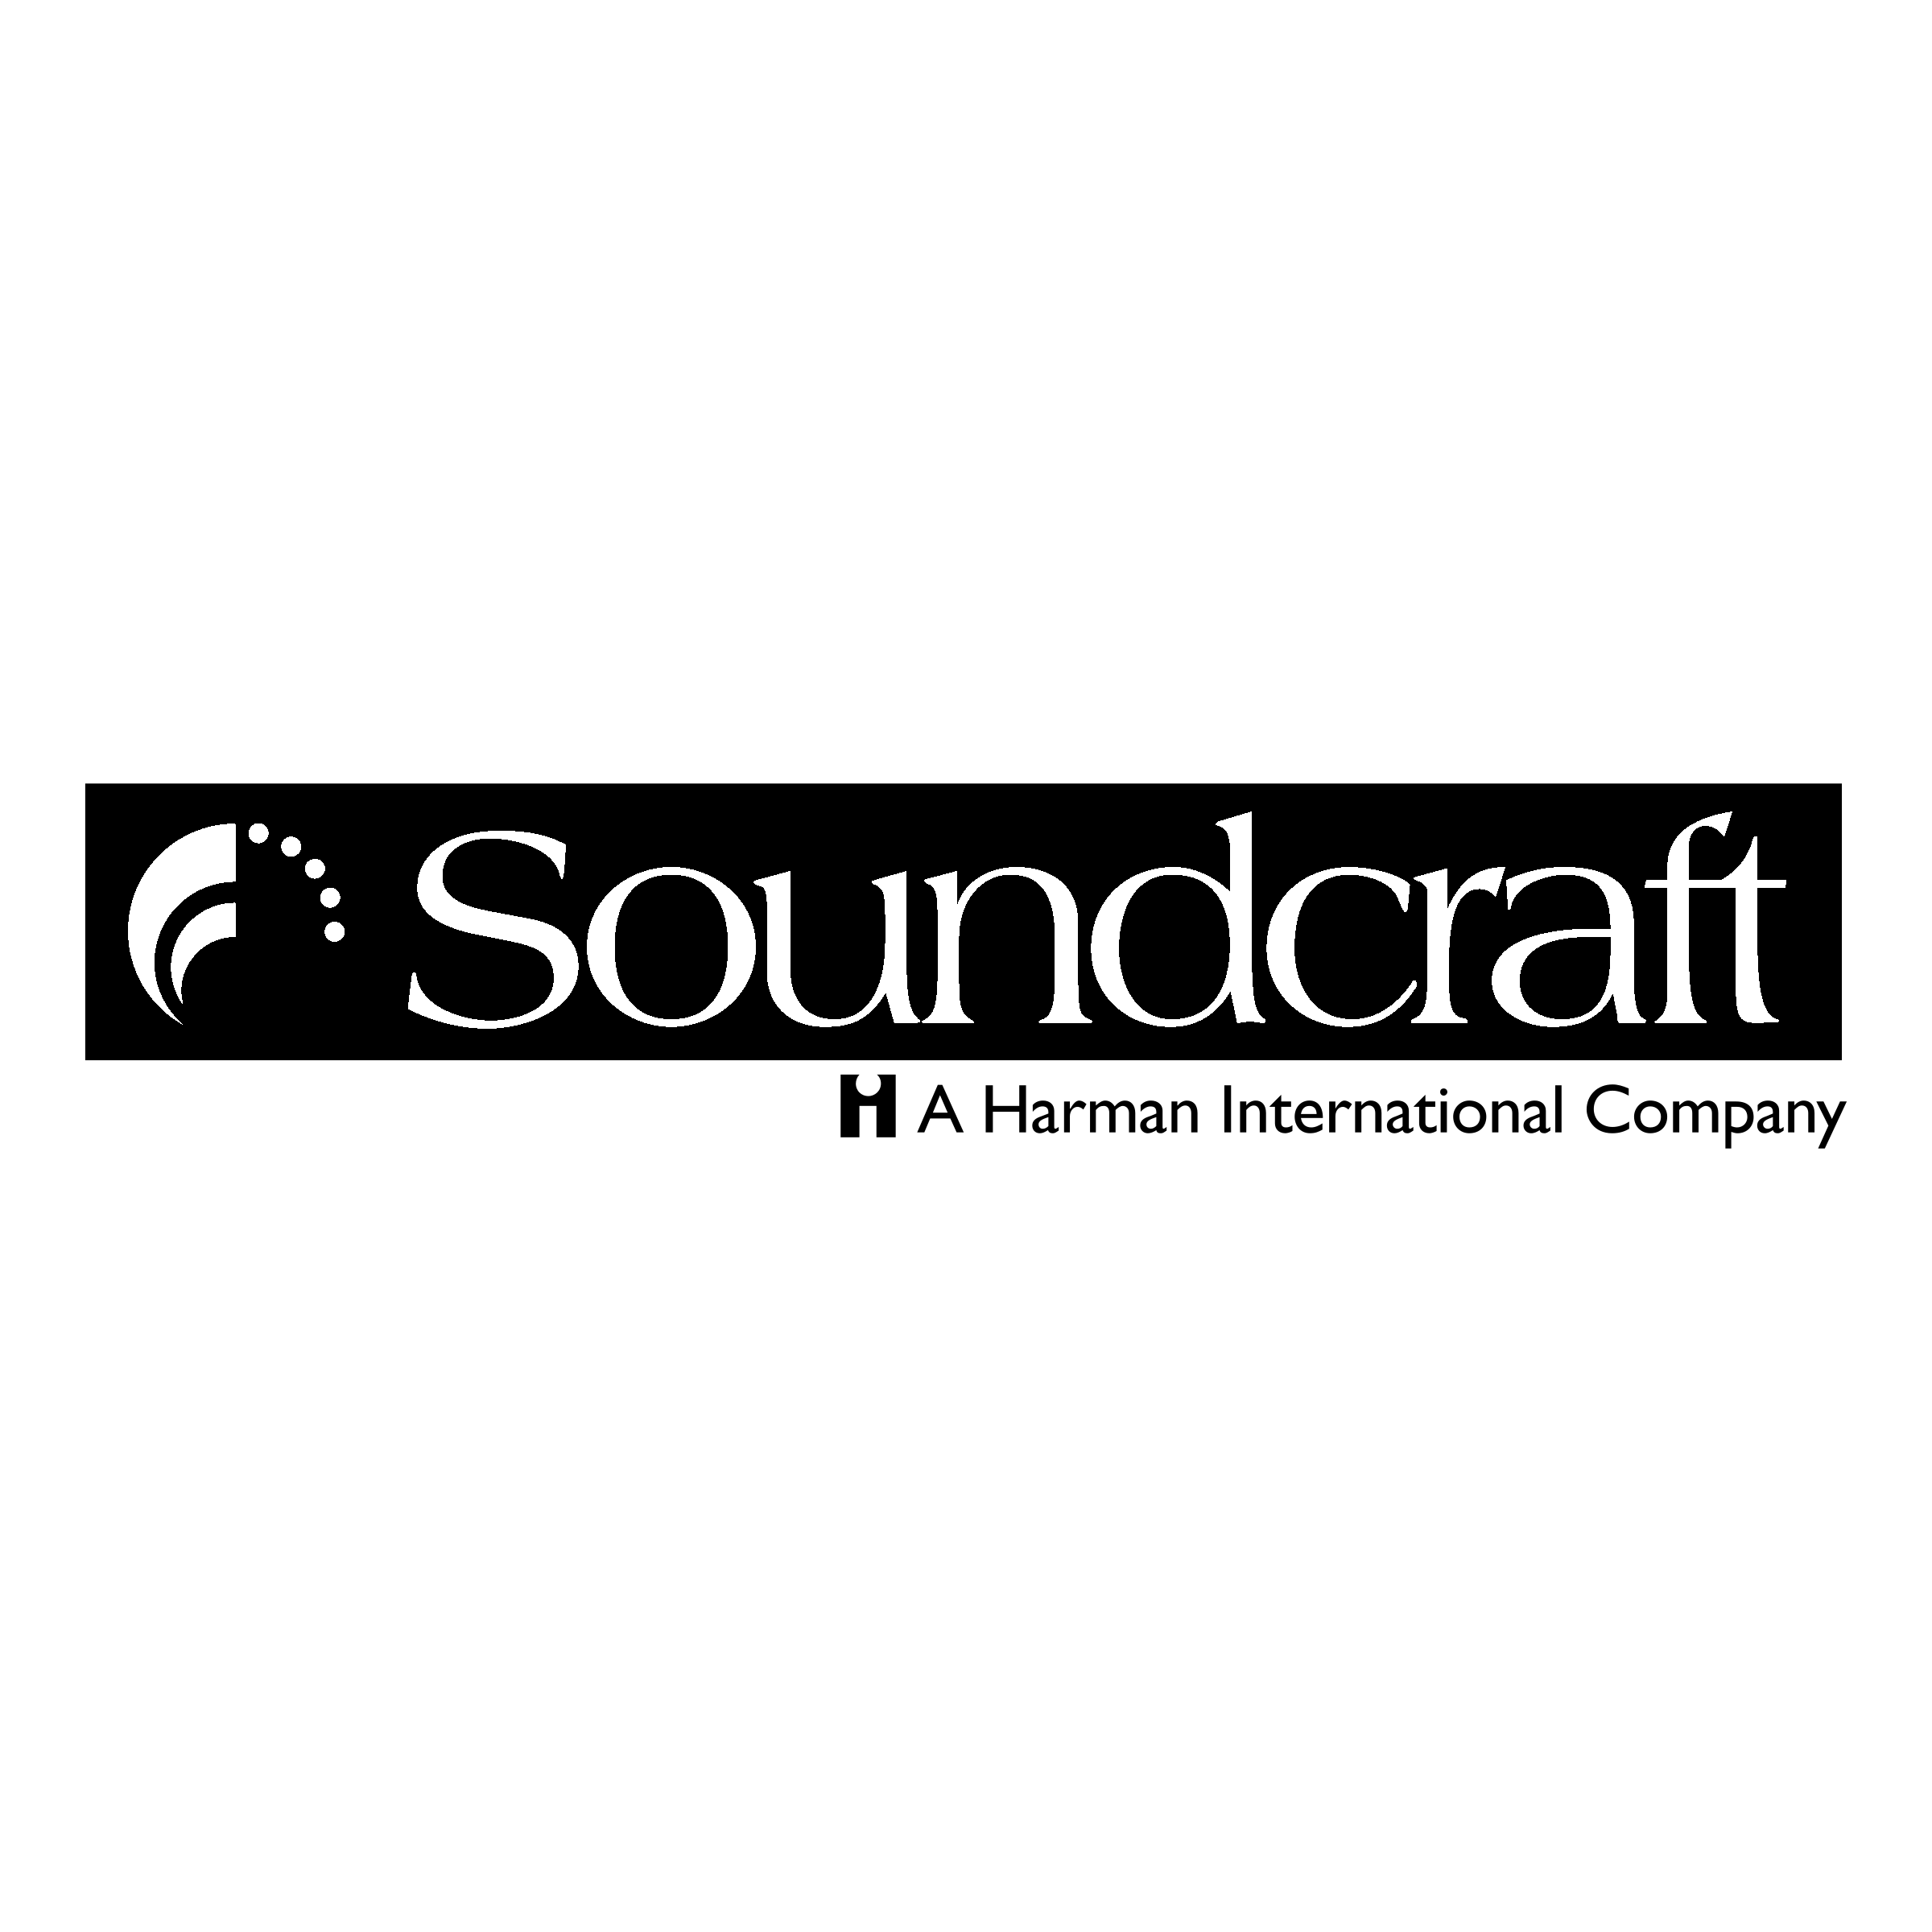 soundcraft-3-logo-black-and-white.png